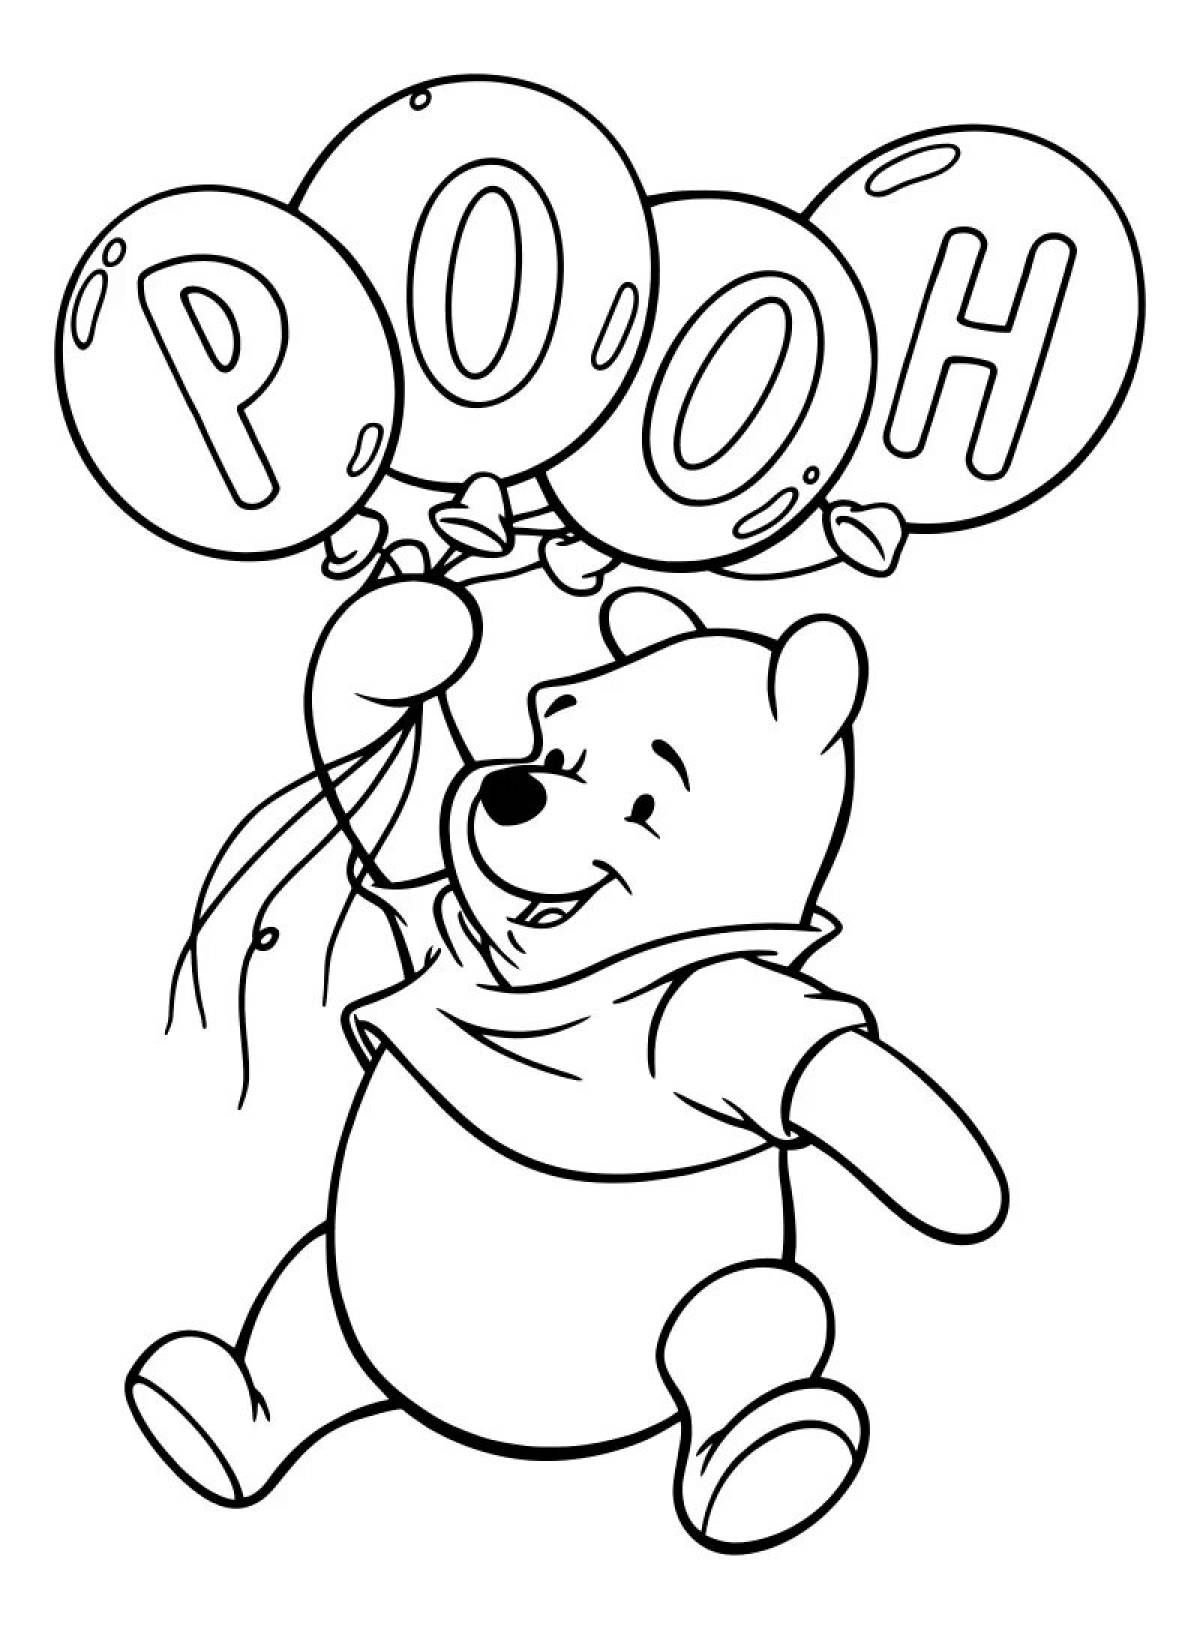 Winnie the pooh with balloon #18